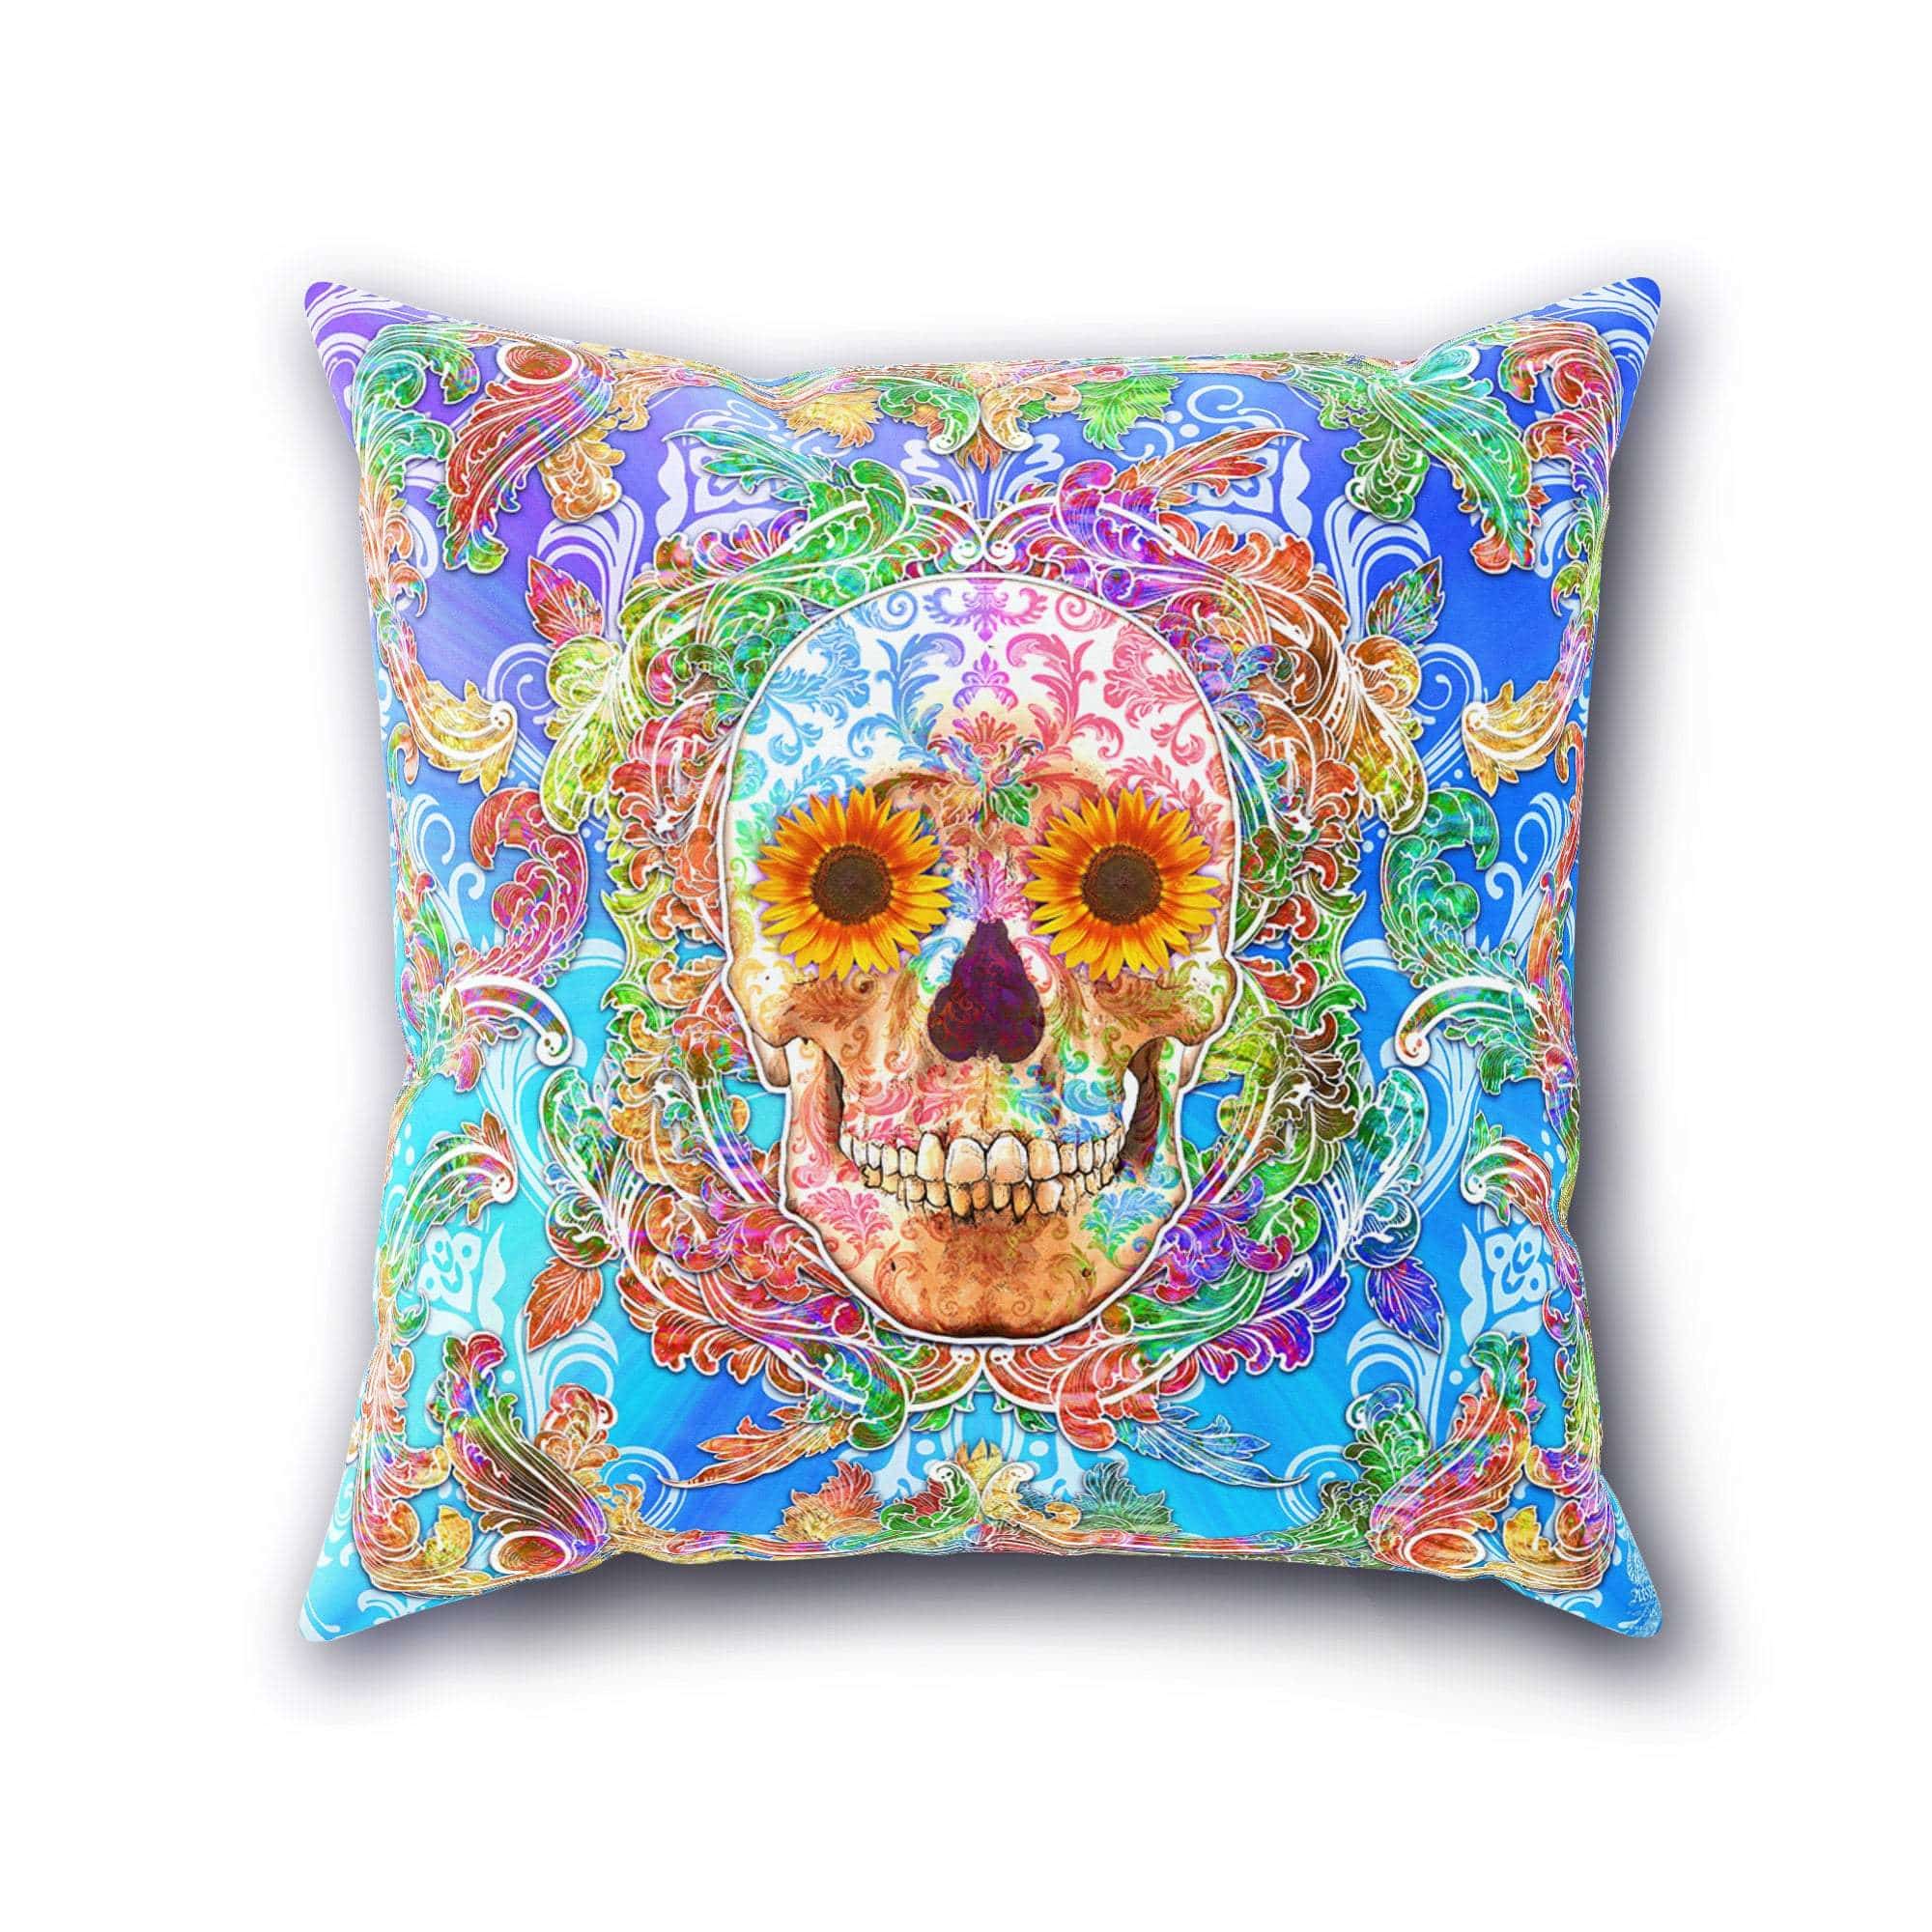 Sugar Skull Throw Pillow, Decorative Accent Cushion, Festive, Day of the Dead Decor, Macabre Art - Psy Color - Abysm Internal